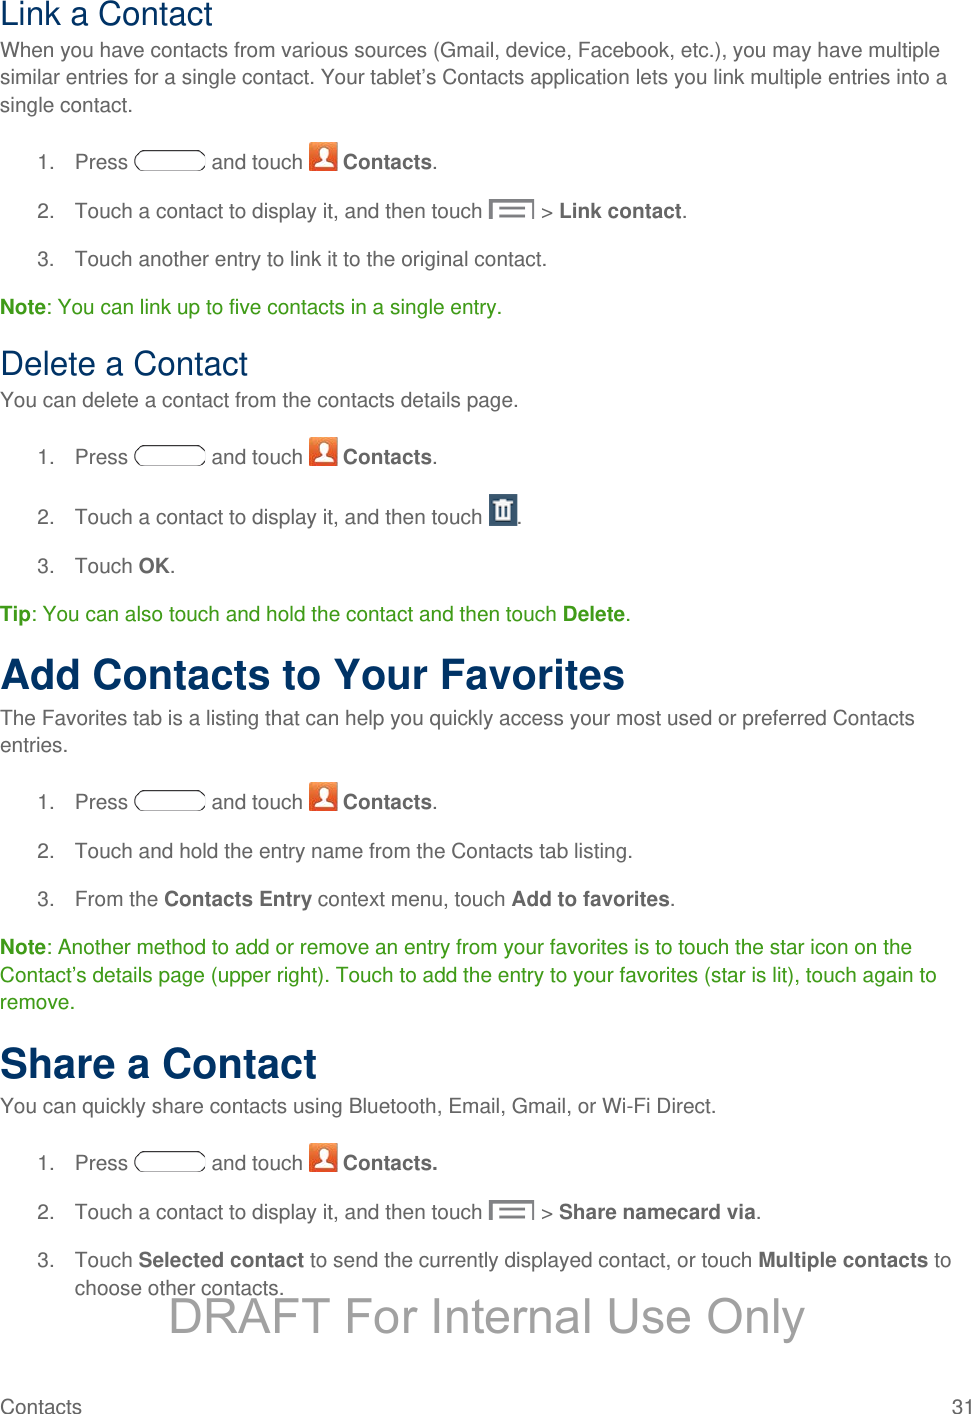 Link a Contact When you have contacts from various sources (Gmail, device, Facebook, etc.), you may have multiple similar entries for a single contact. Your tablet’s Contacts application lets you link multiple entries into a single contact. 1. Press   and touch   Contacts. 2. Touch a contact to display it, and then touch  &gt; Link contact. 3. Touch another entry to link it to the original contact. Note: You can link up to five contacts in a single entry. Delete a Contact You can delete a contact from the contacts details page. 1. Press   and touch   Contacts. 2. Touch a contact to display it, and then touch  . 3. Touch OK. Tip: You can also touch and hold the contact and then touch Delete. Add Contacts to Your Favorites The Favorites tab is a listing that can help you quickly access your most used or preferred Contacts entries. 1. Press   and touch   Contacts. 2. Touch and hold the entry name from the Contacts tab listing. 3. From the Contacts Entry context menu, touch Add to favorites.  Note: Another method to add or remove an entry from your favorites is to touch the star icon on the Contact’s details page (upper right). Touch to add the entry to your favorites (star is lit), touch again to remove. Share a Contact You can quickly share contacts using Bluetooth, Email, Gmail, or Wi-Fi Direct. 1. Press   and touch   Contacts. 2. Touch a contact to display it, and then touch  &gt; Share namecard via. 3. Touch Selected contact to send the currently displayed contact, or touch Multiple contacts to choose other contacts. Contacts 31   DRAFT For Internal Use Only